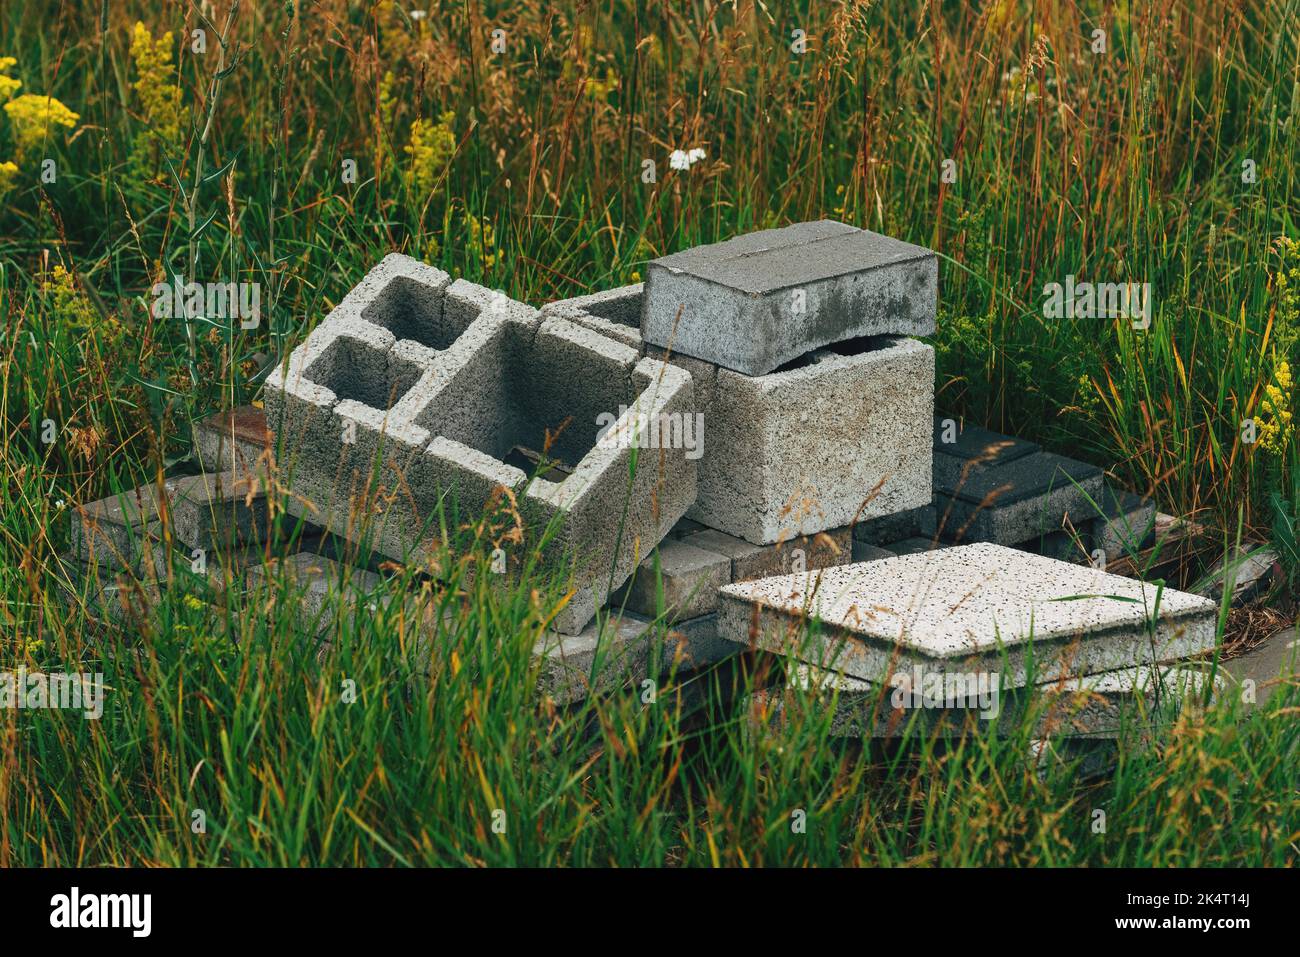 Cement blocks construction material in deep grass, selective focus Stock Photo